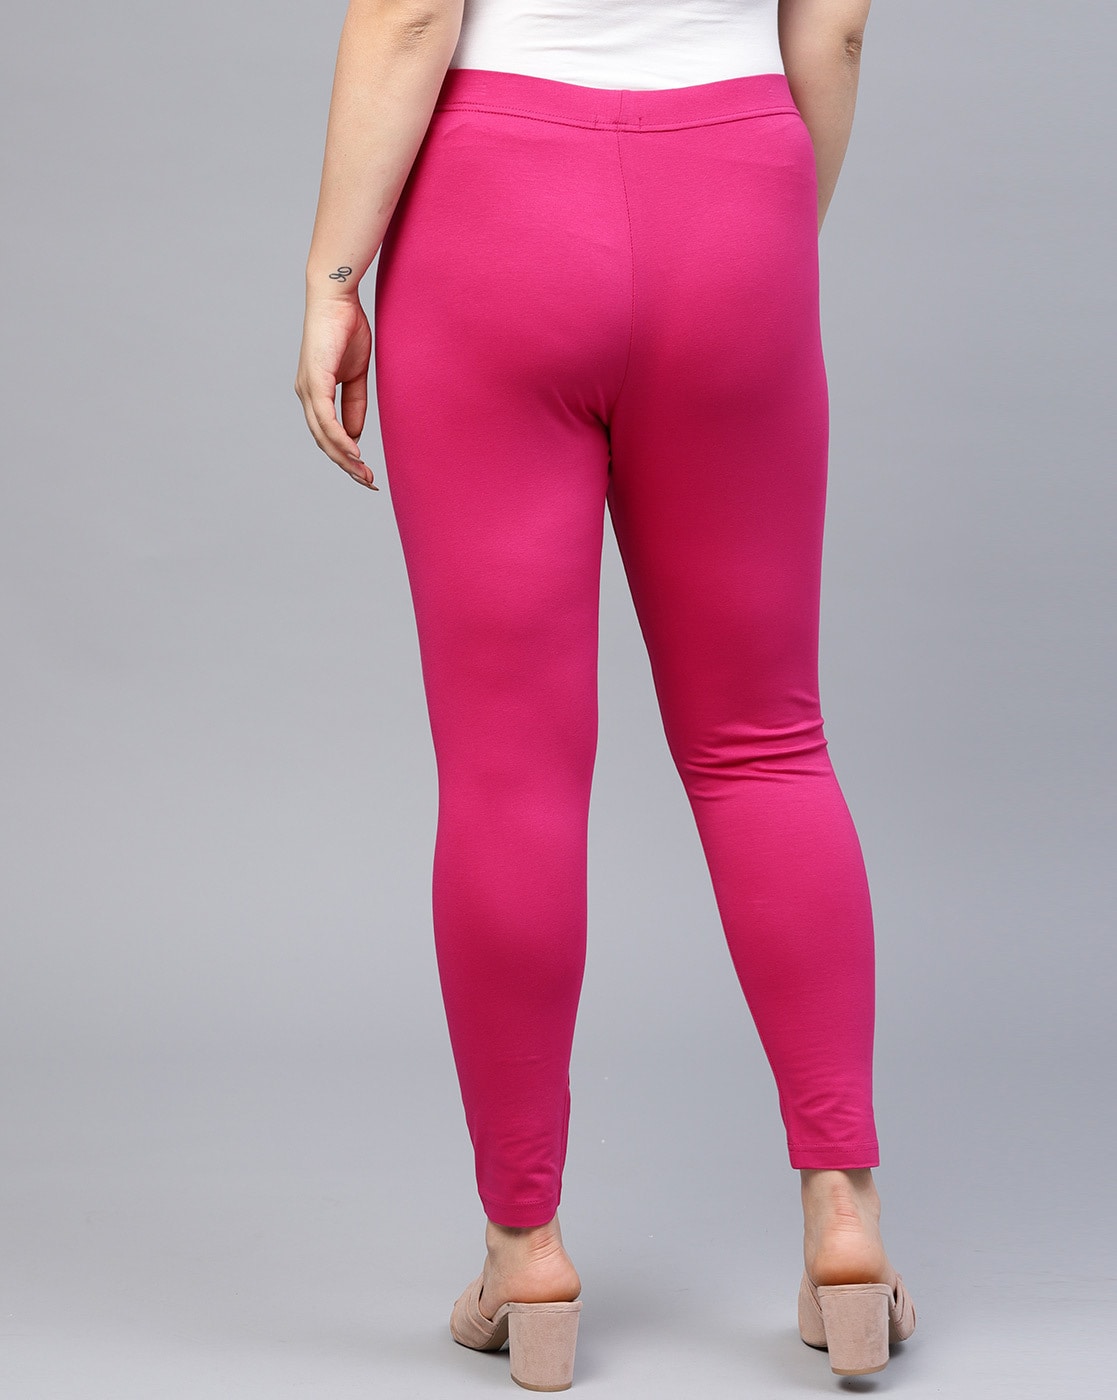 Go Colors Leggings Shop Near Messe | International Society of Precision  Agriculture